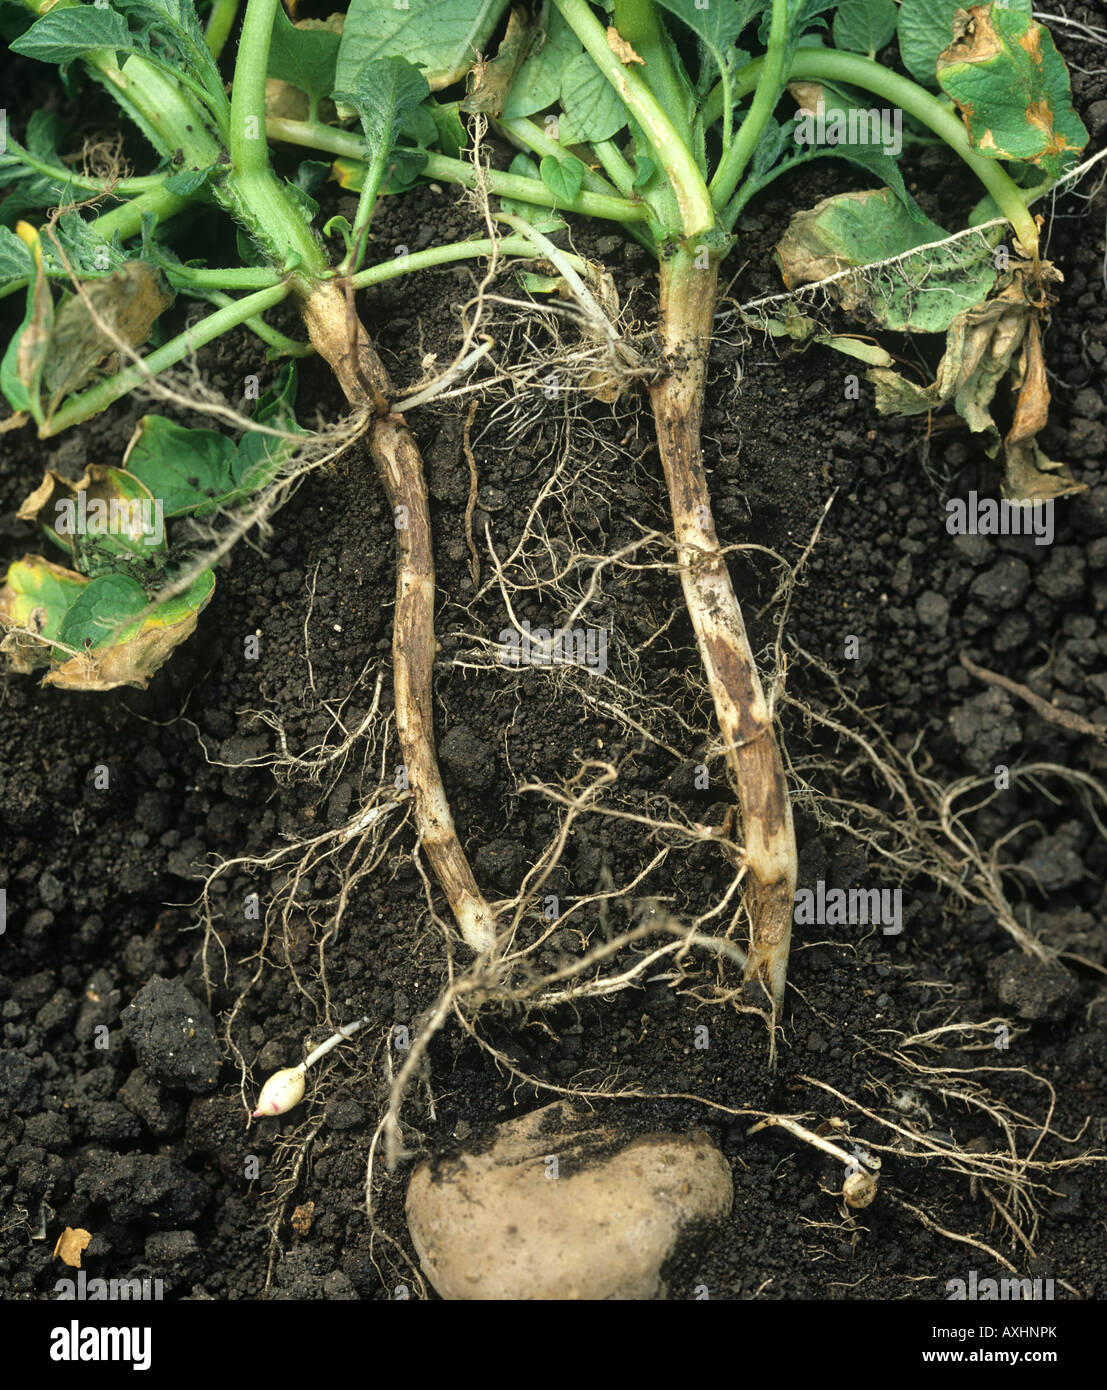 Stem canker Rhizoctonia solani on potato roots from mature plant Stock Photo